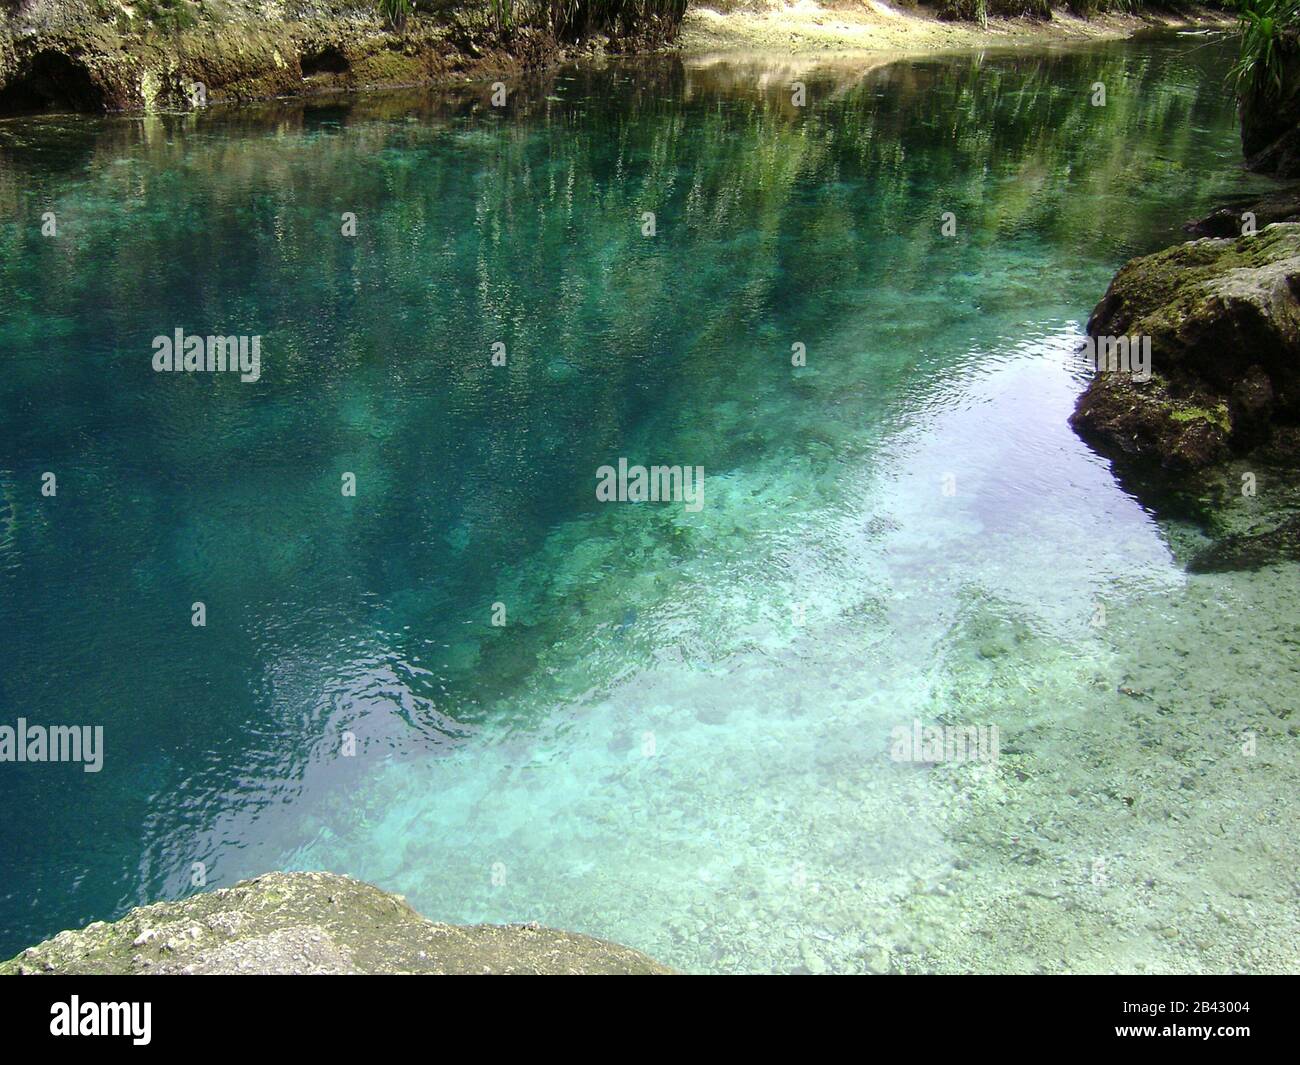 Hues of green at the Enchanted River of Surigao del Sur, Philippines. Stock Photo